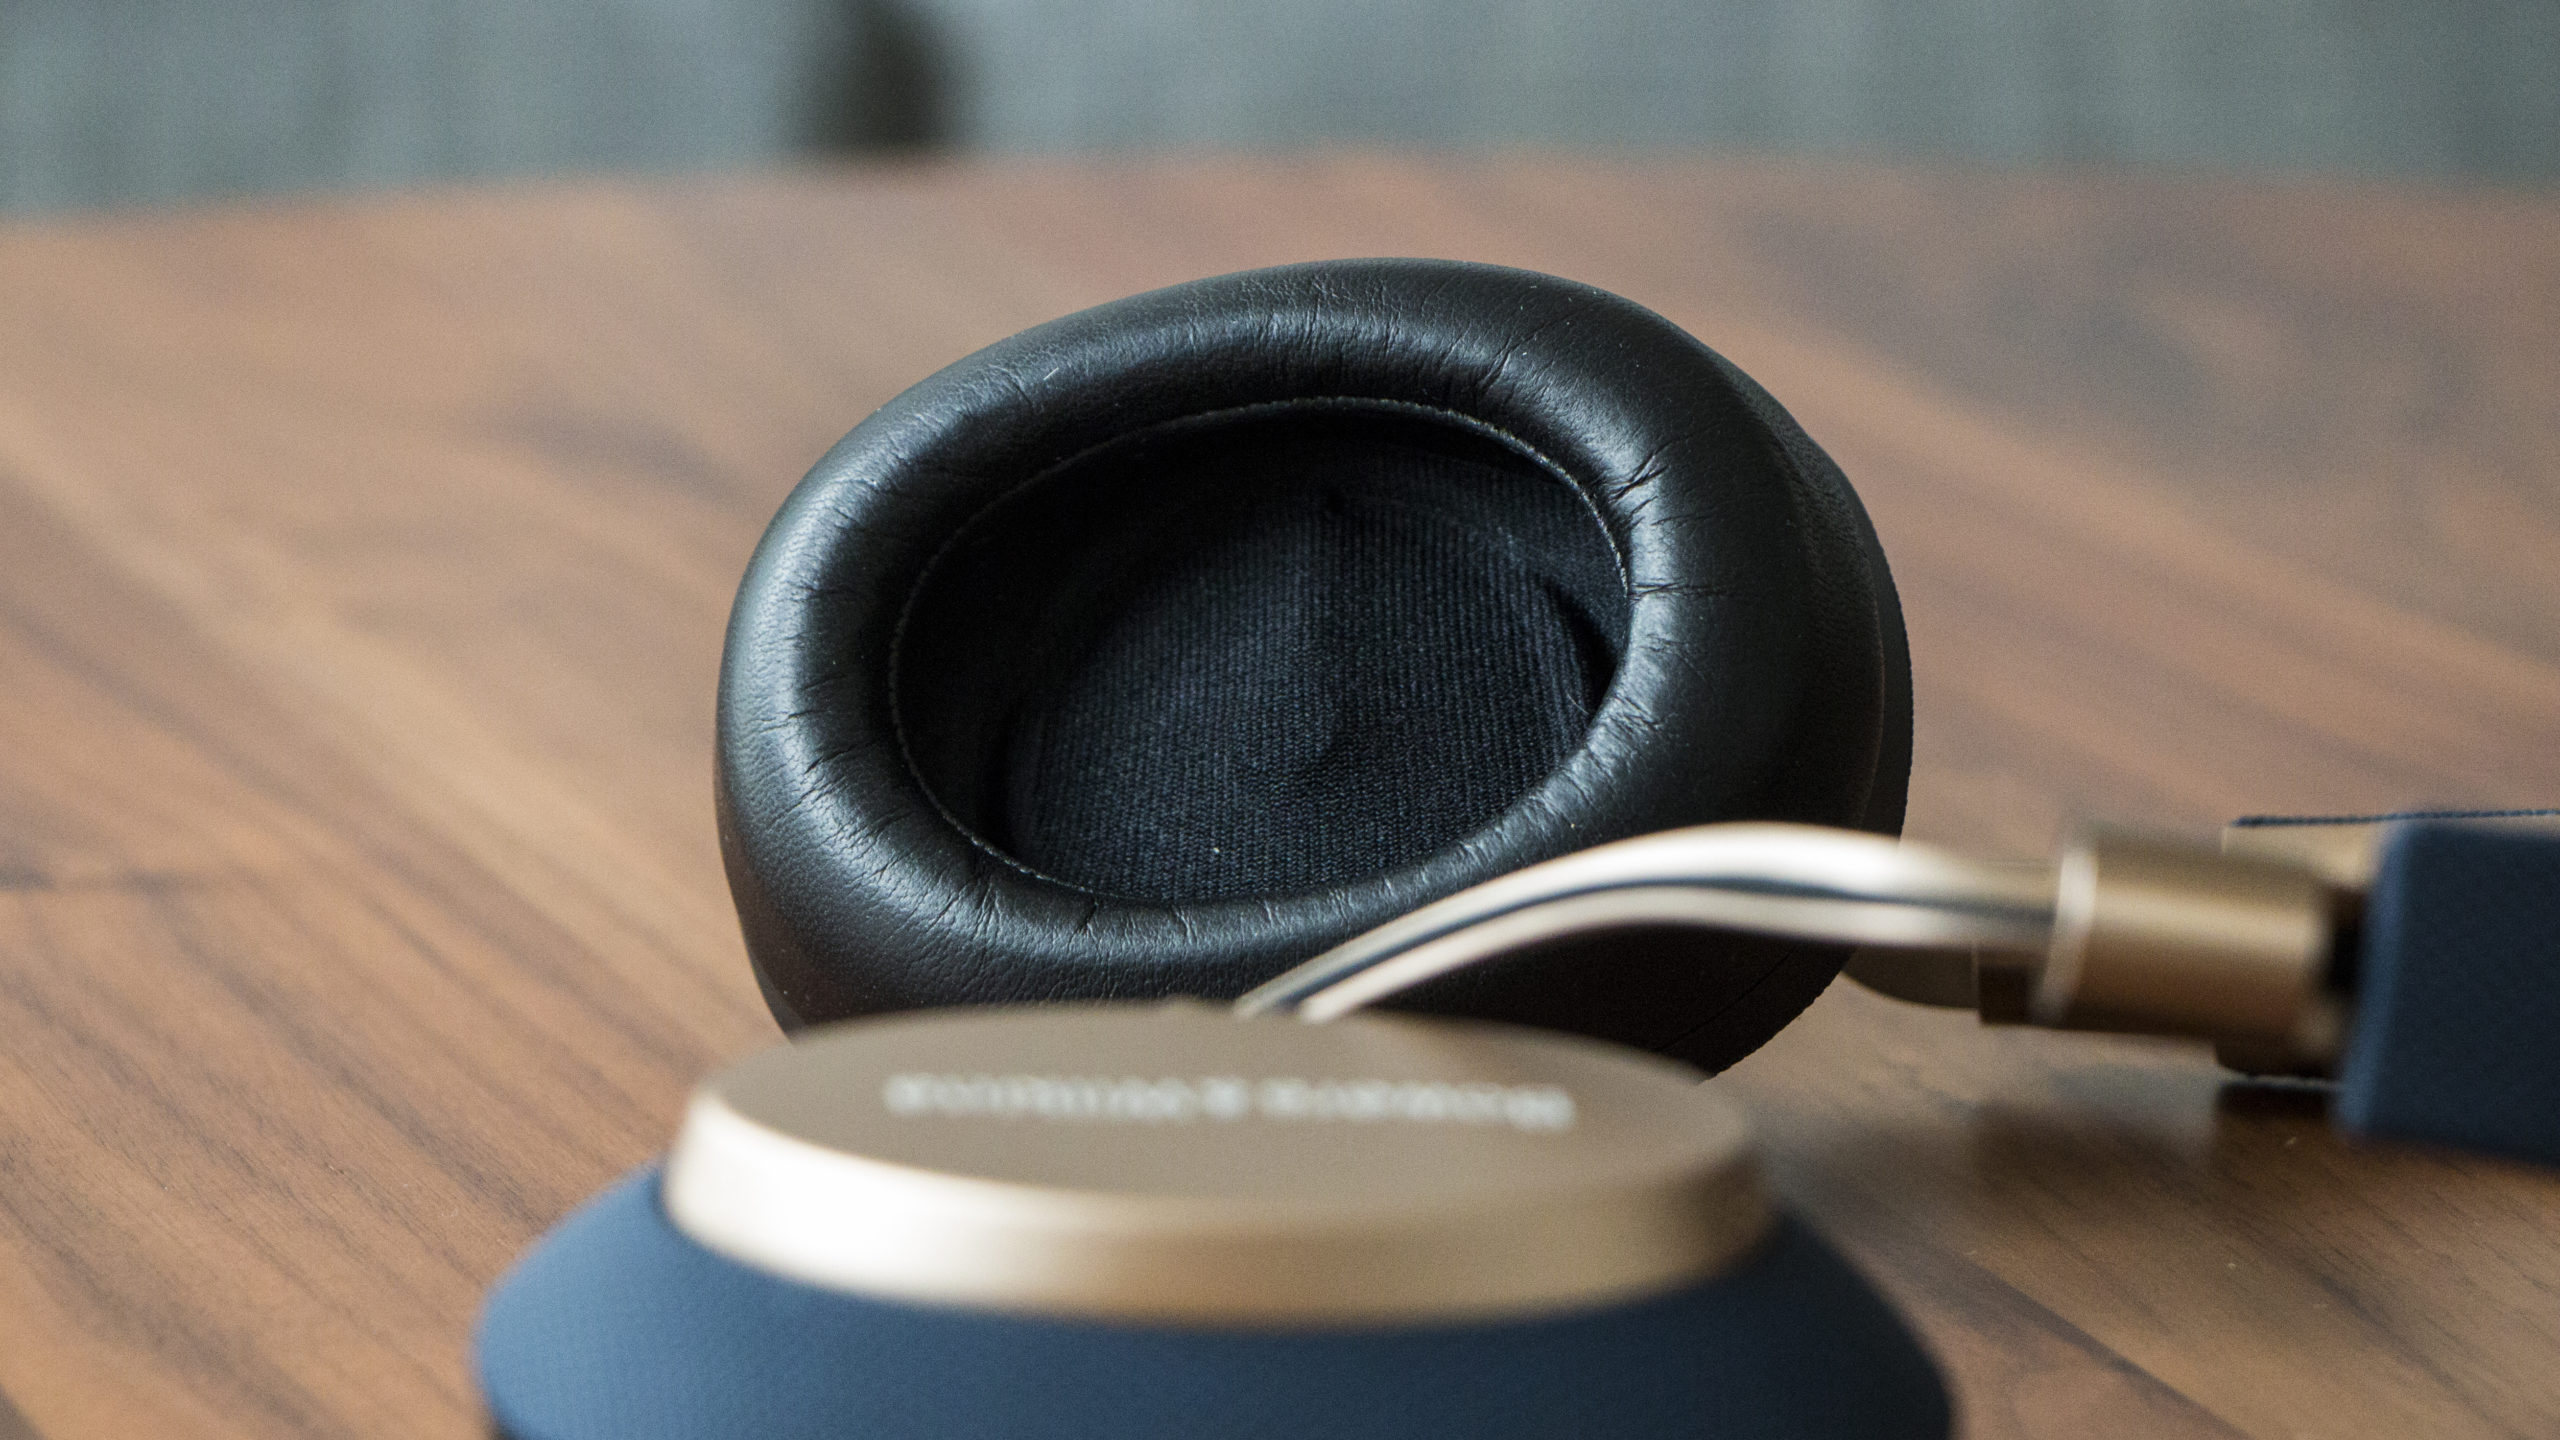 Bowers & Wilkins’ PX Noise-Cancelling Wireless Headphones Blew My Mind